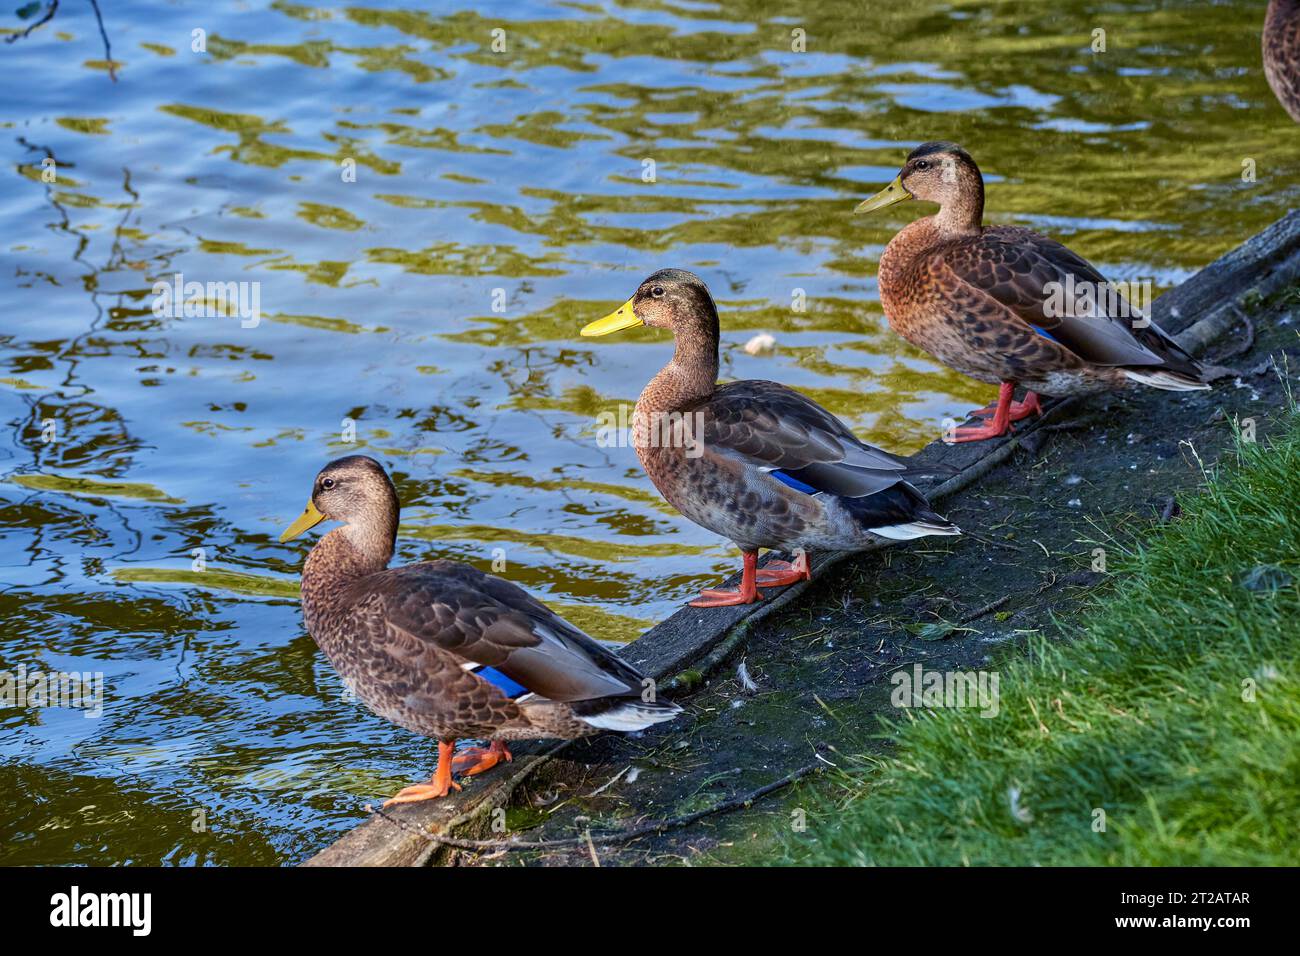 Image of three wild ducks on the shore of a pond Stock Photo